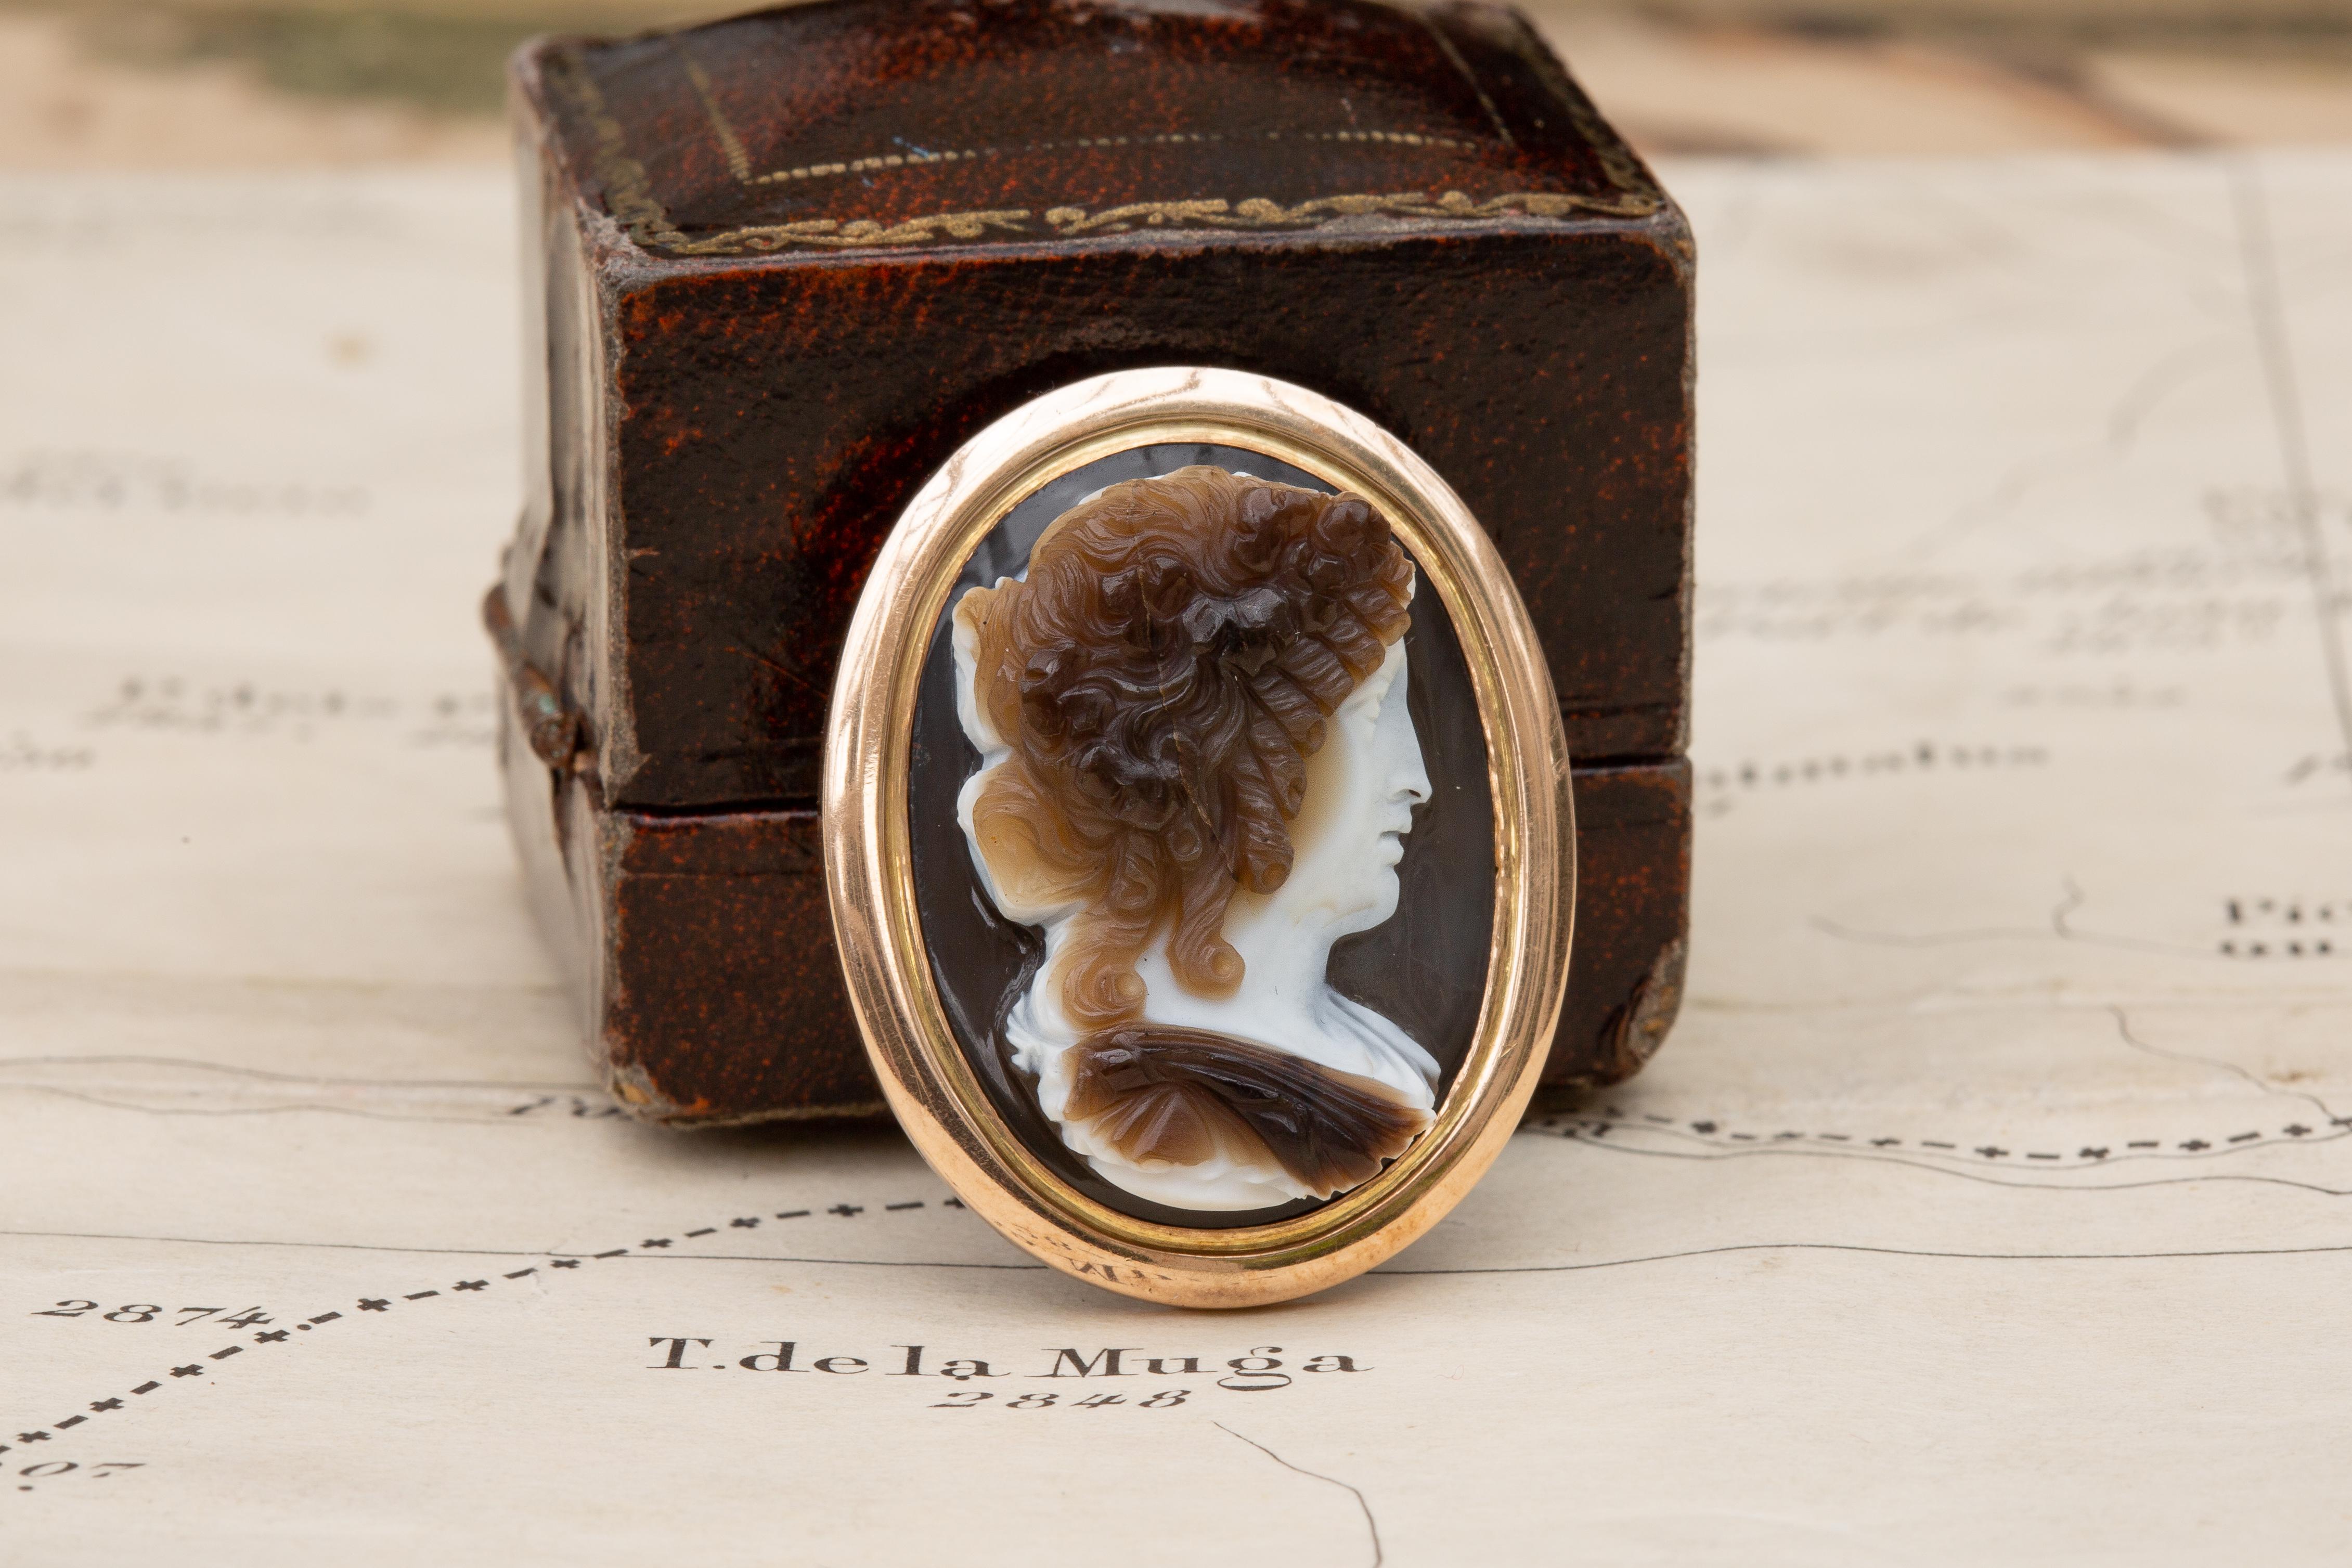 A stunning early 19th century Italian hardstone cameo pendant, probably circle of Nicola Morelli. This beautiful four layered agate is carved from one stone with great skill to reveal the bust of a Bacchante. The carver cleverly uses each of the